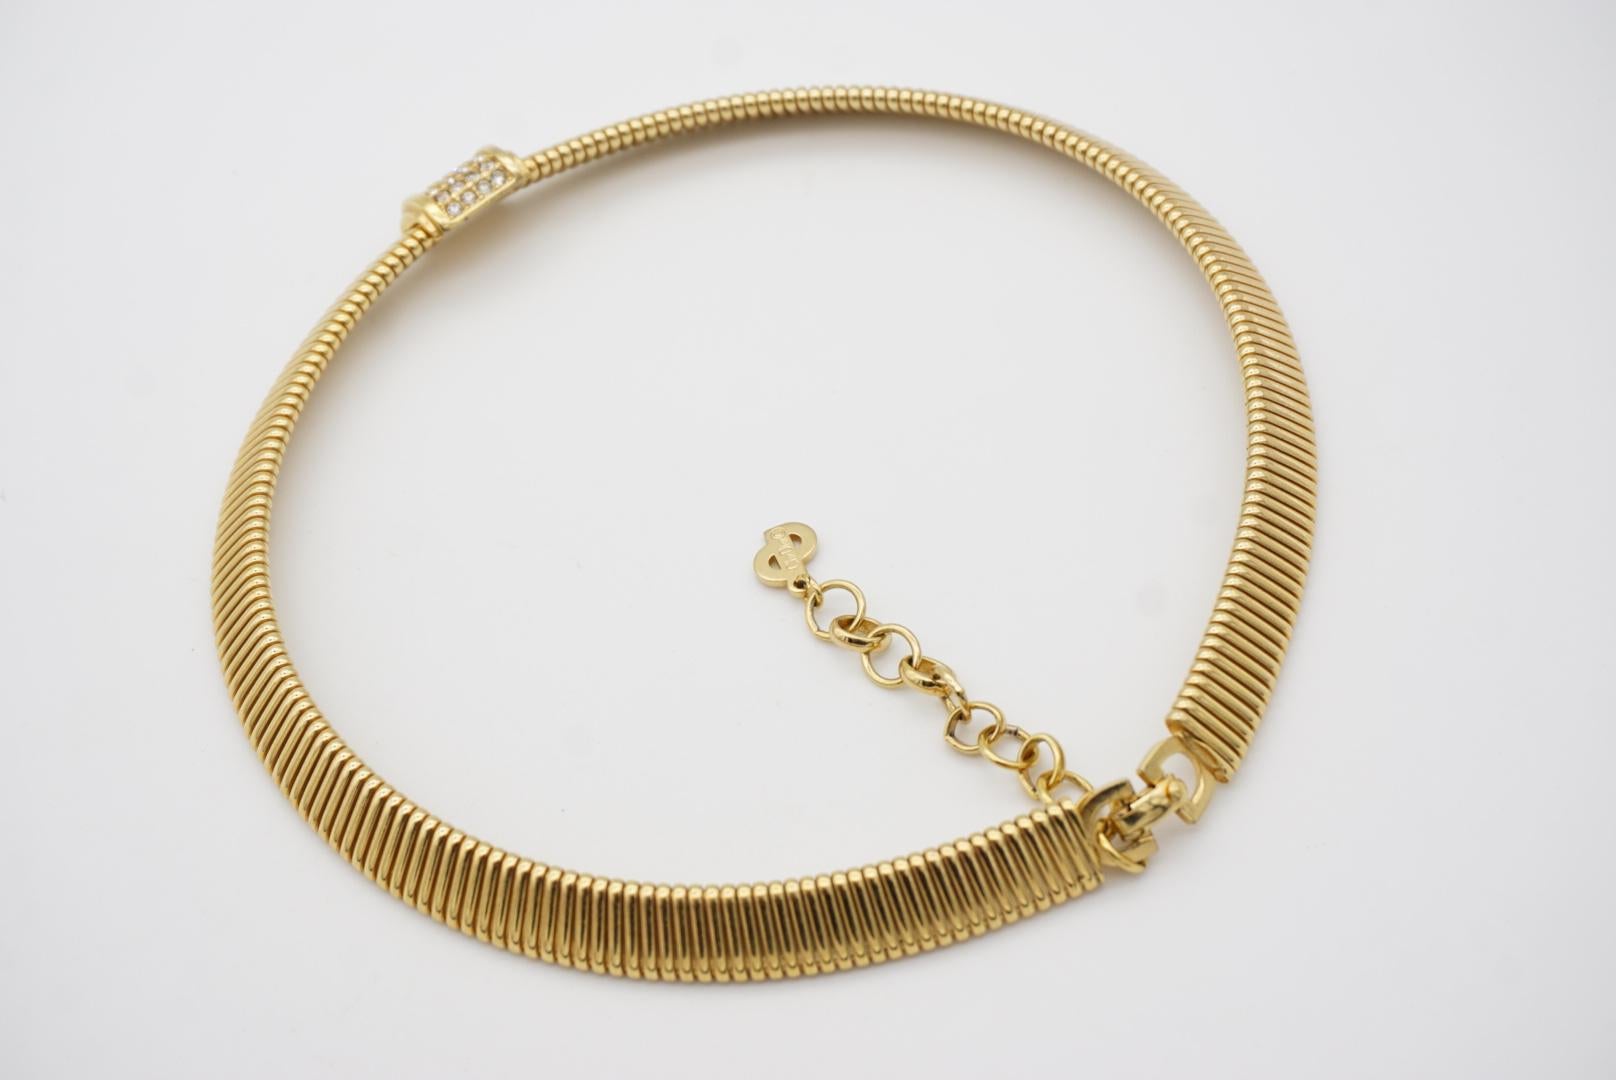 Christian Dior Vintage 1980s Omega Collar Shining Crystals Square Gold Necklace For Sale 2